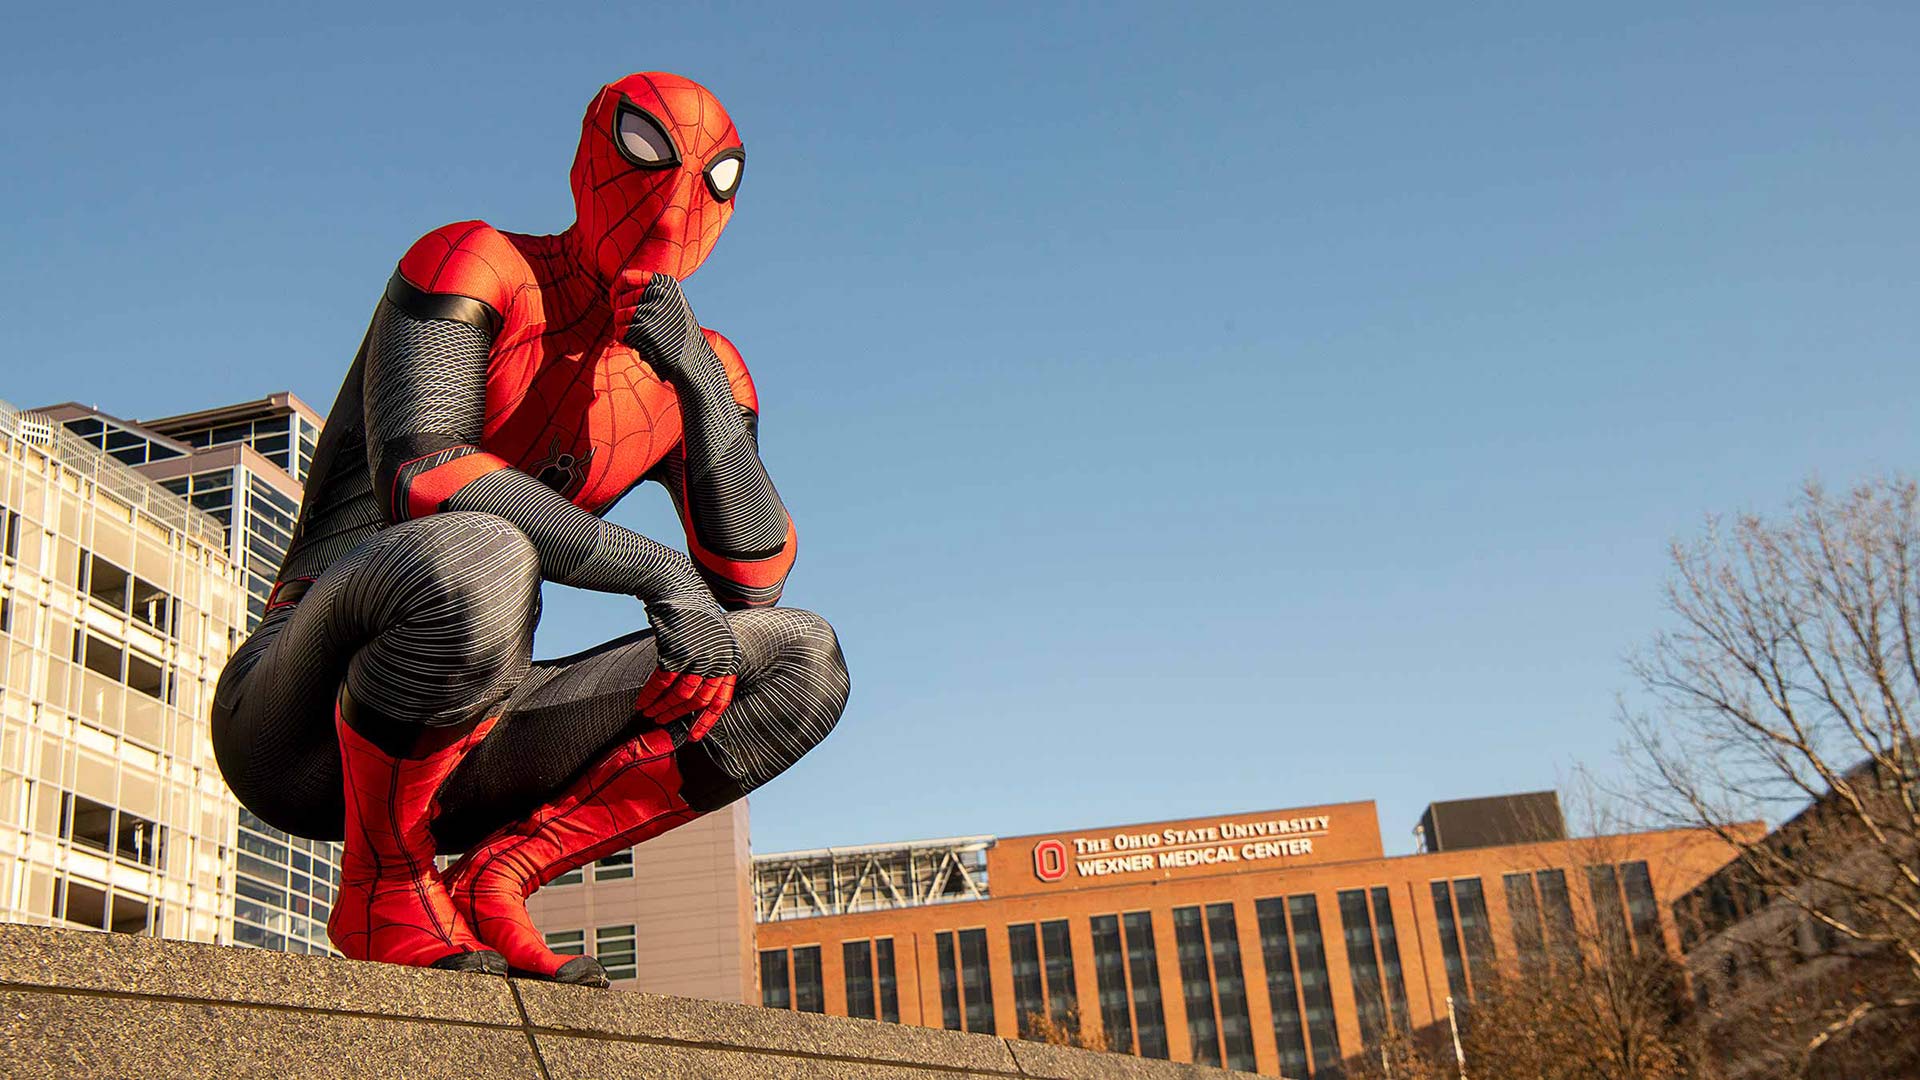 Spider-Man in a squat pose on a wall with The Ohio State Wexner Medical Center building on a background